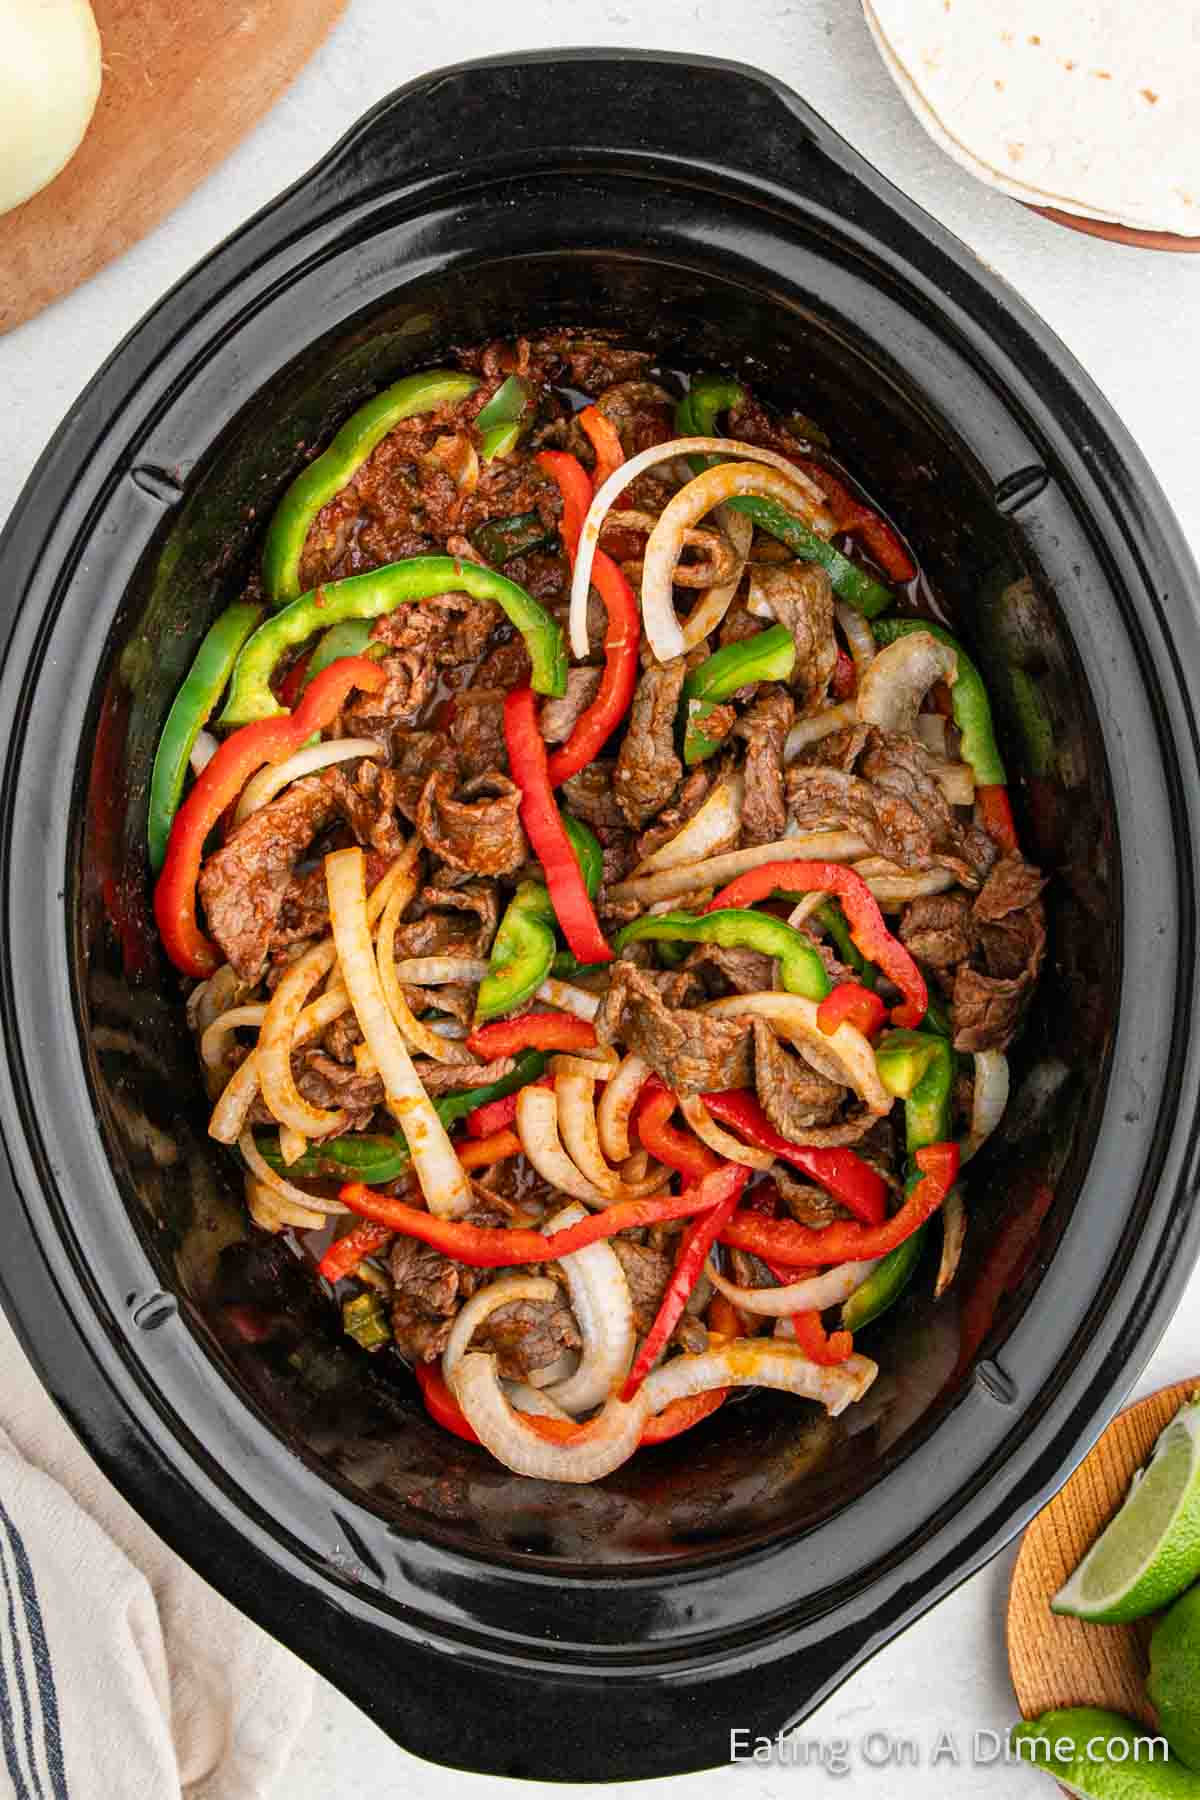 Steak fajitas in the slow cooker with peppers and onions